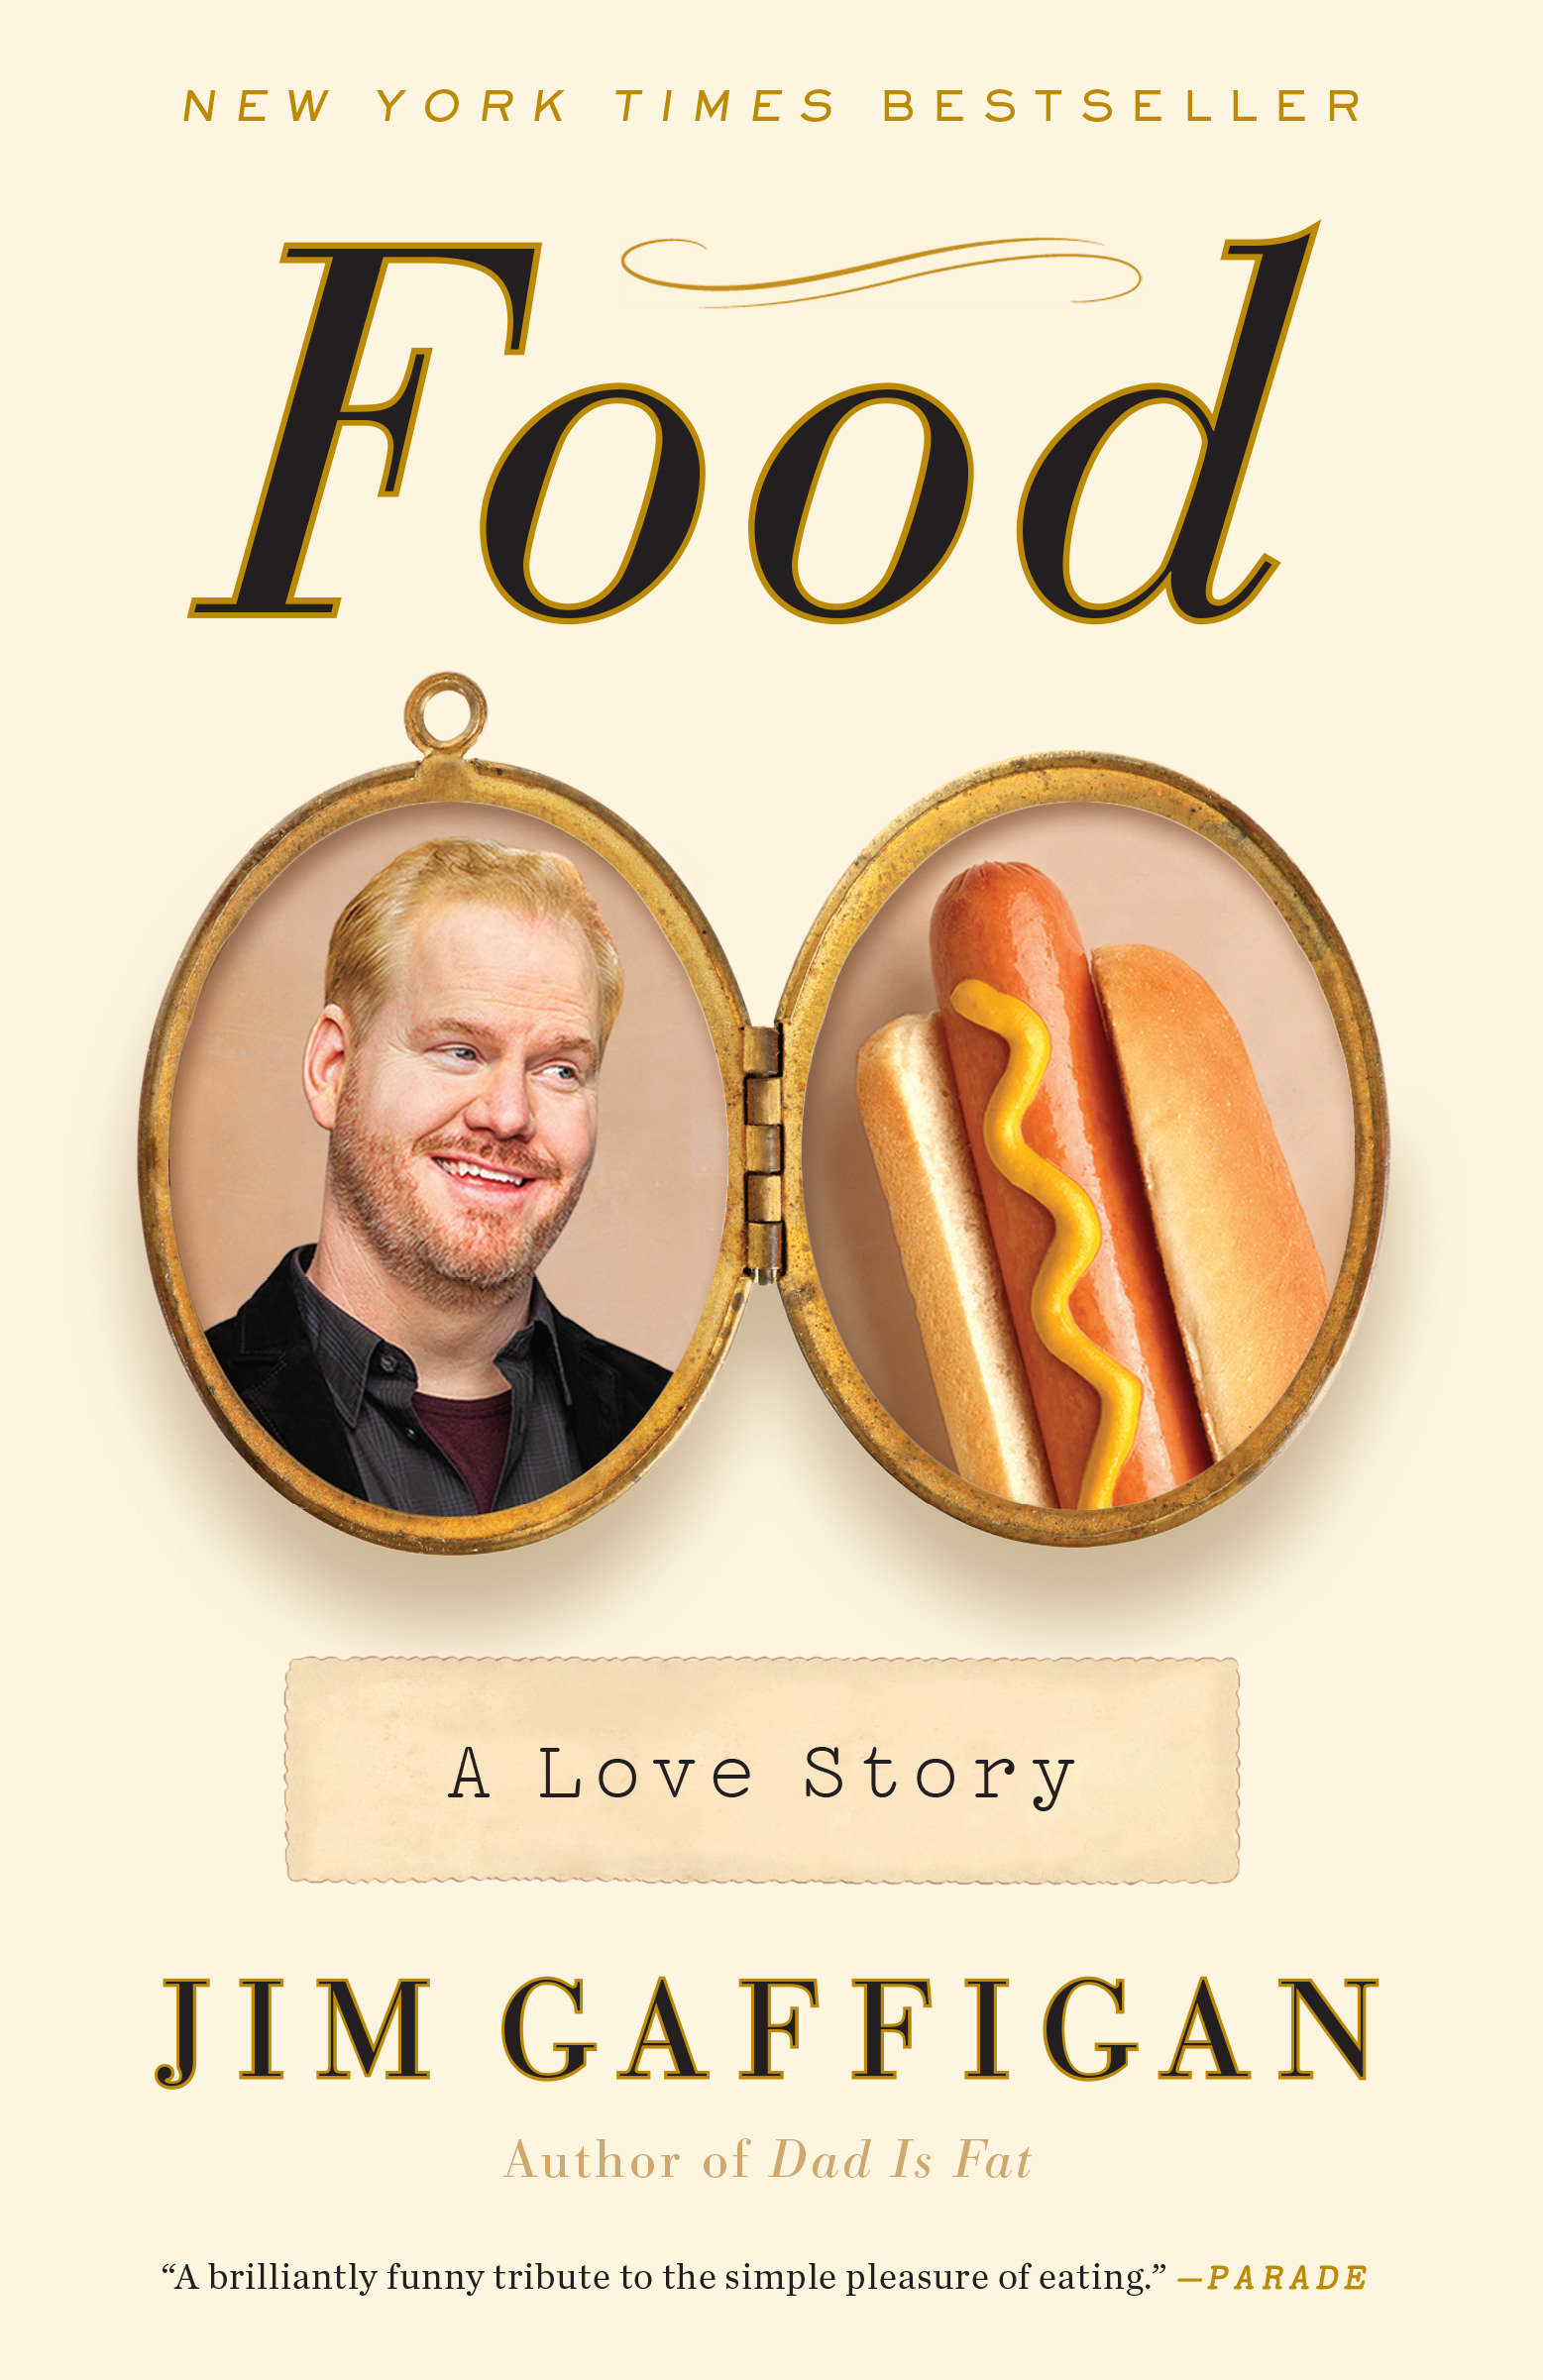 Cover Image of Food: A Love Story